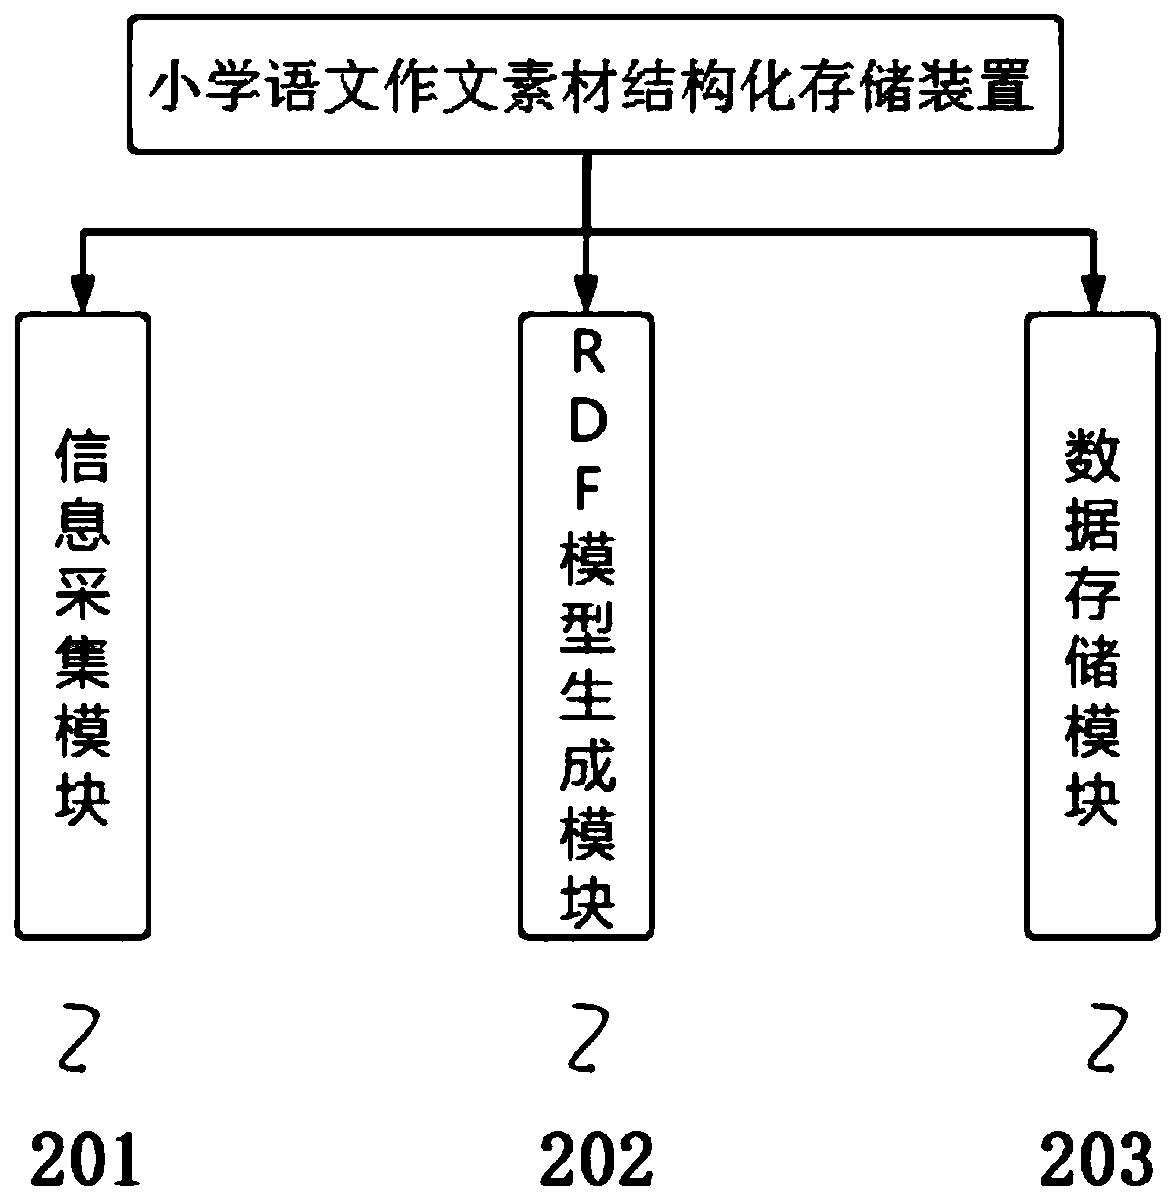 Method and device for structured storage of primary school Chinese composition material based on associated data